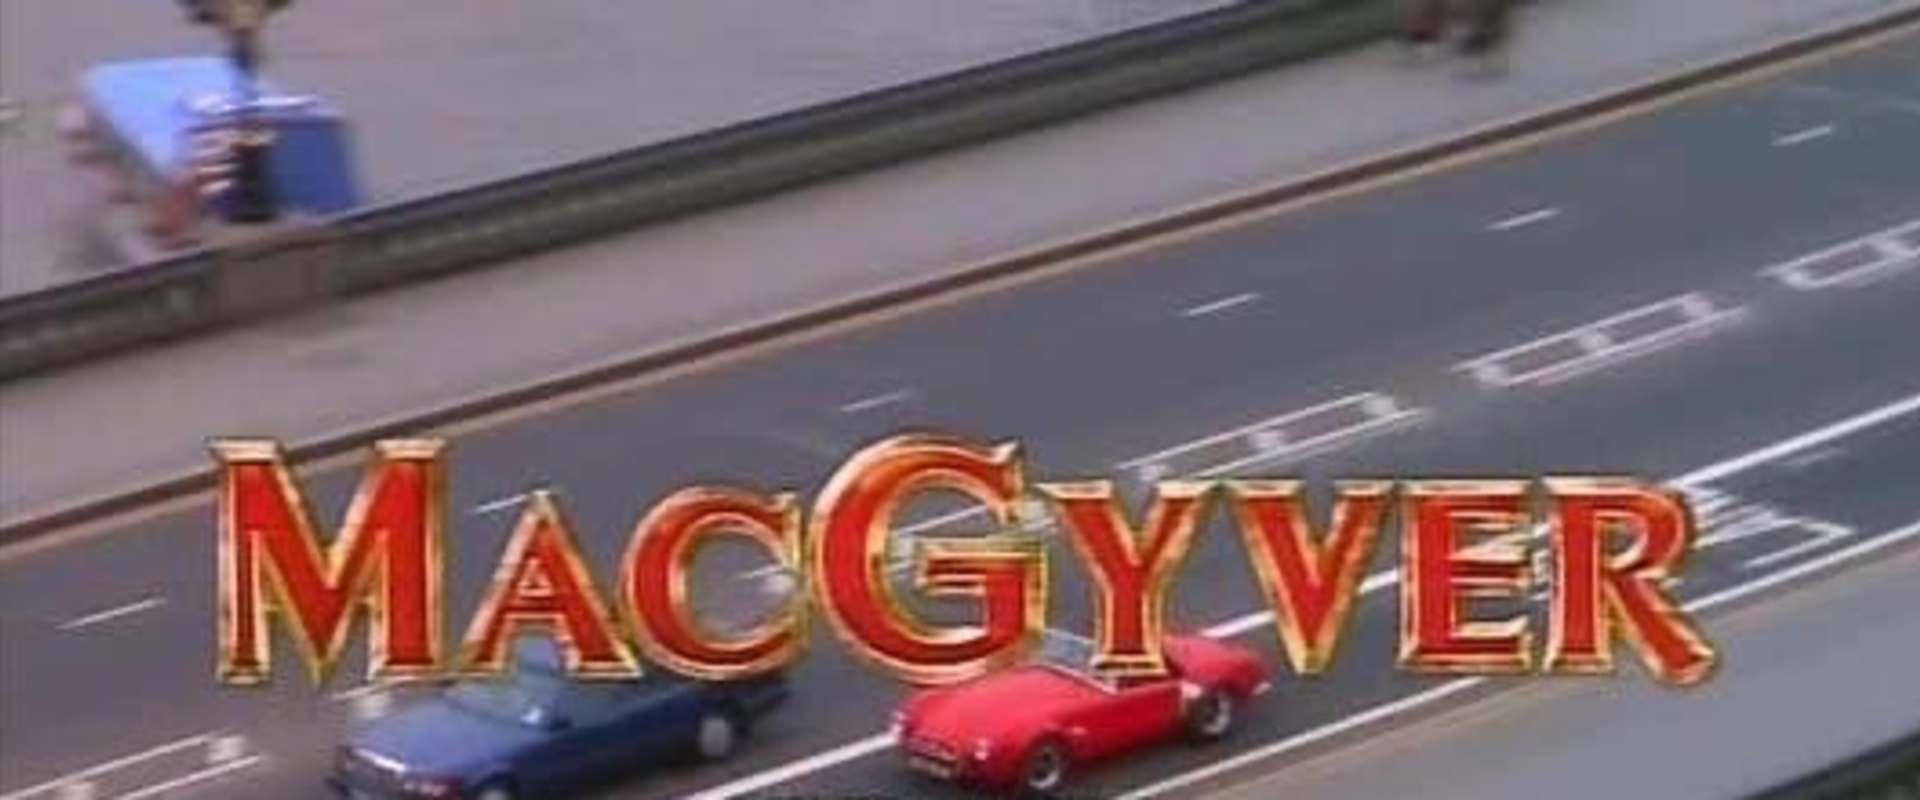 MacGyver: Trail to Doomsday background 2